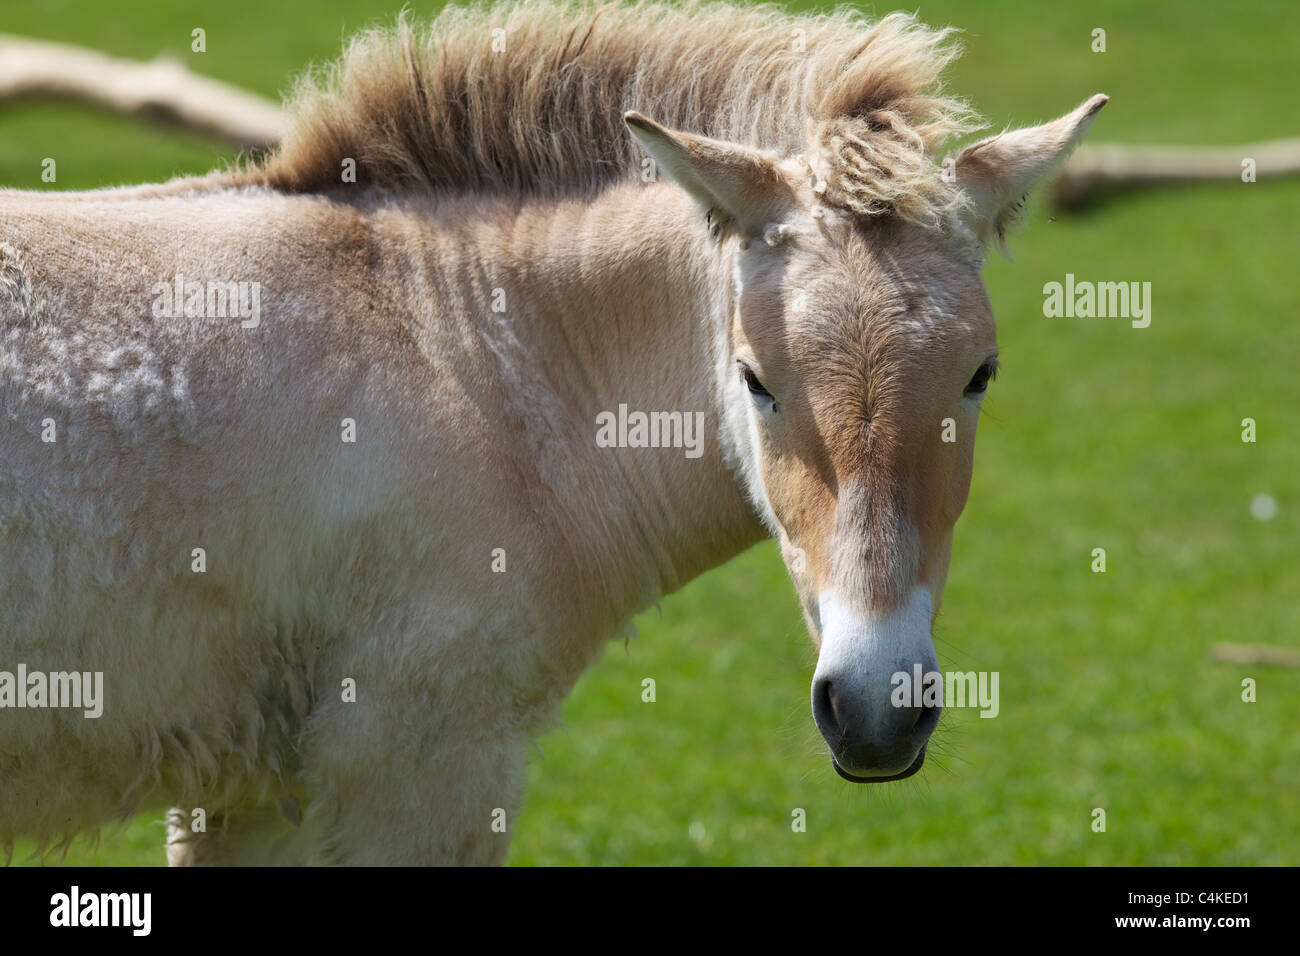 A Przewalski's horse from the Asian steppes. Whipsnade zoo, England Stock Photo